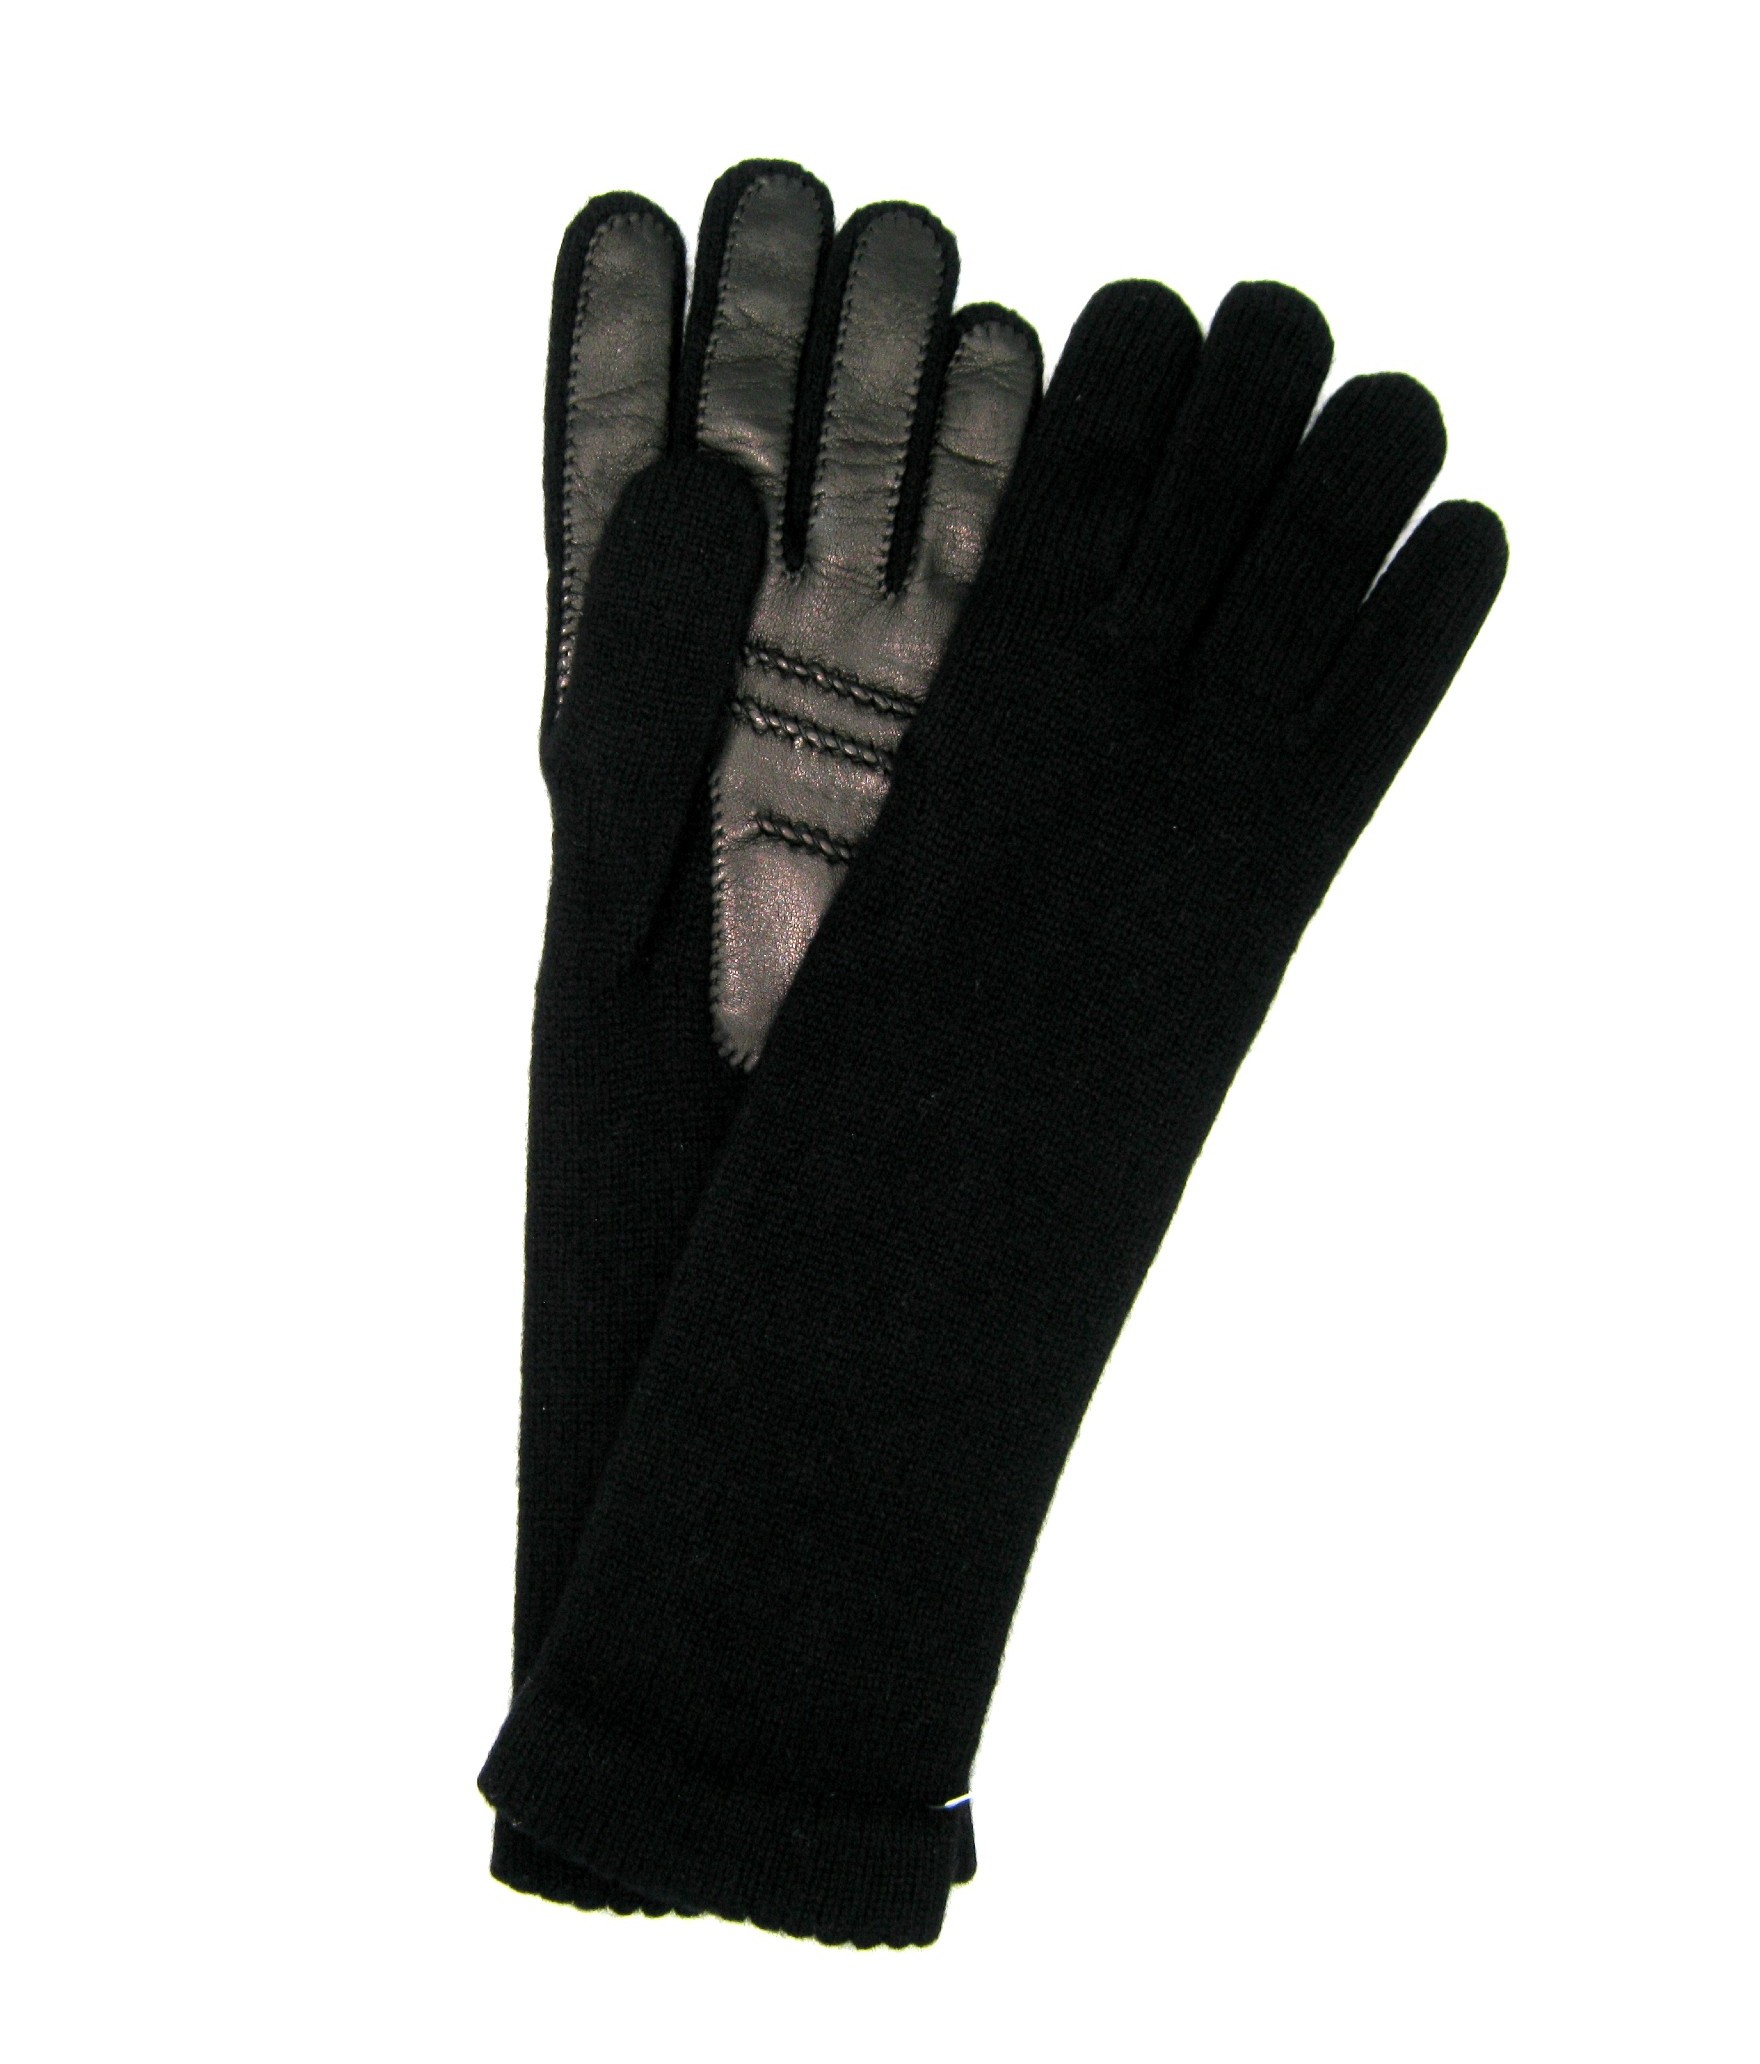 Woman Casual 100%cashmere gloves 4BT with Nappa leather palm